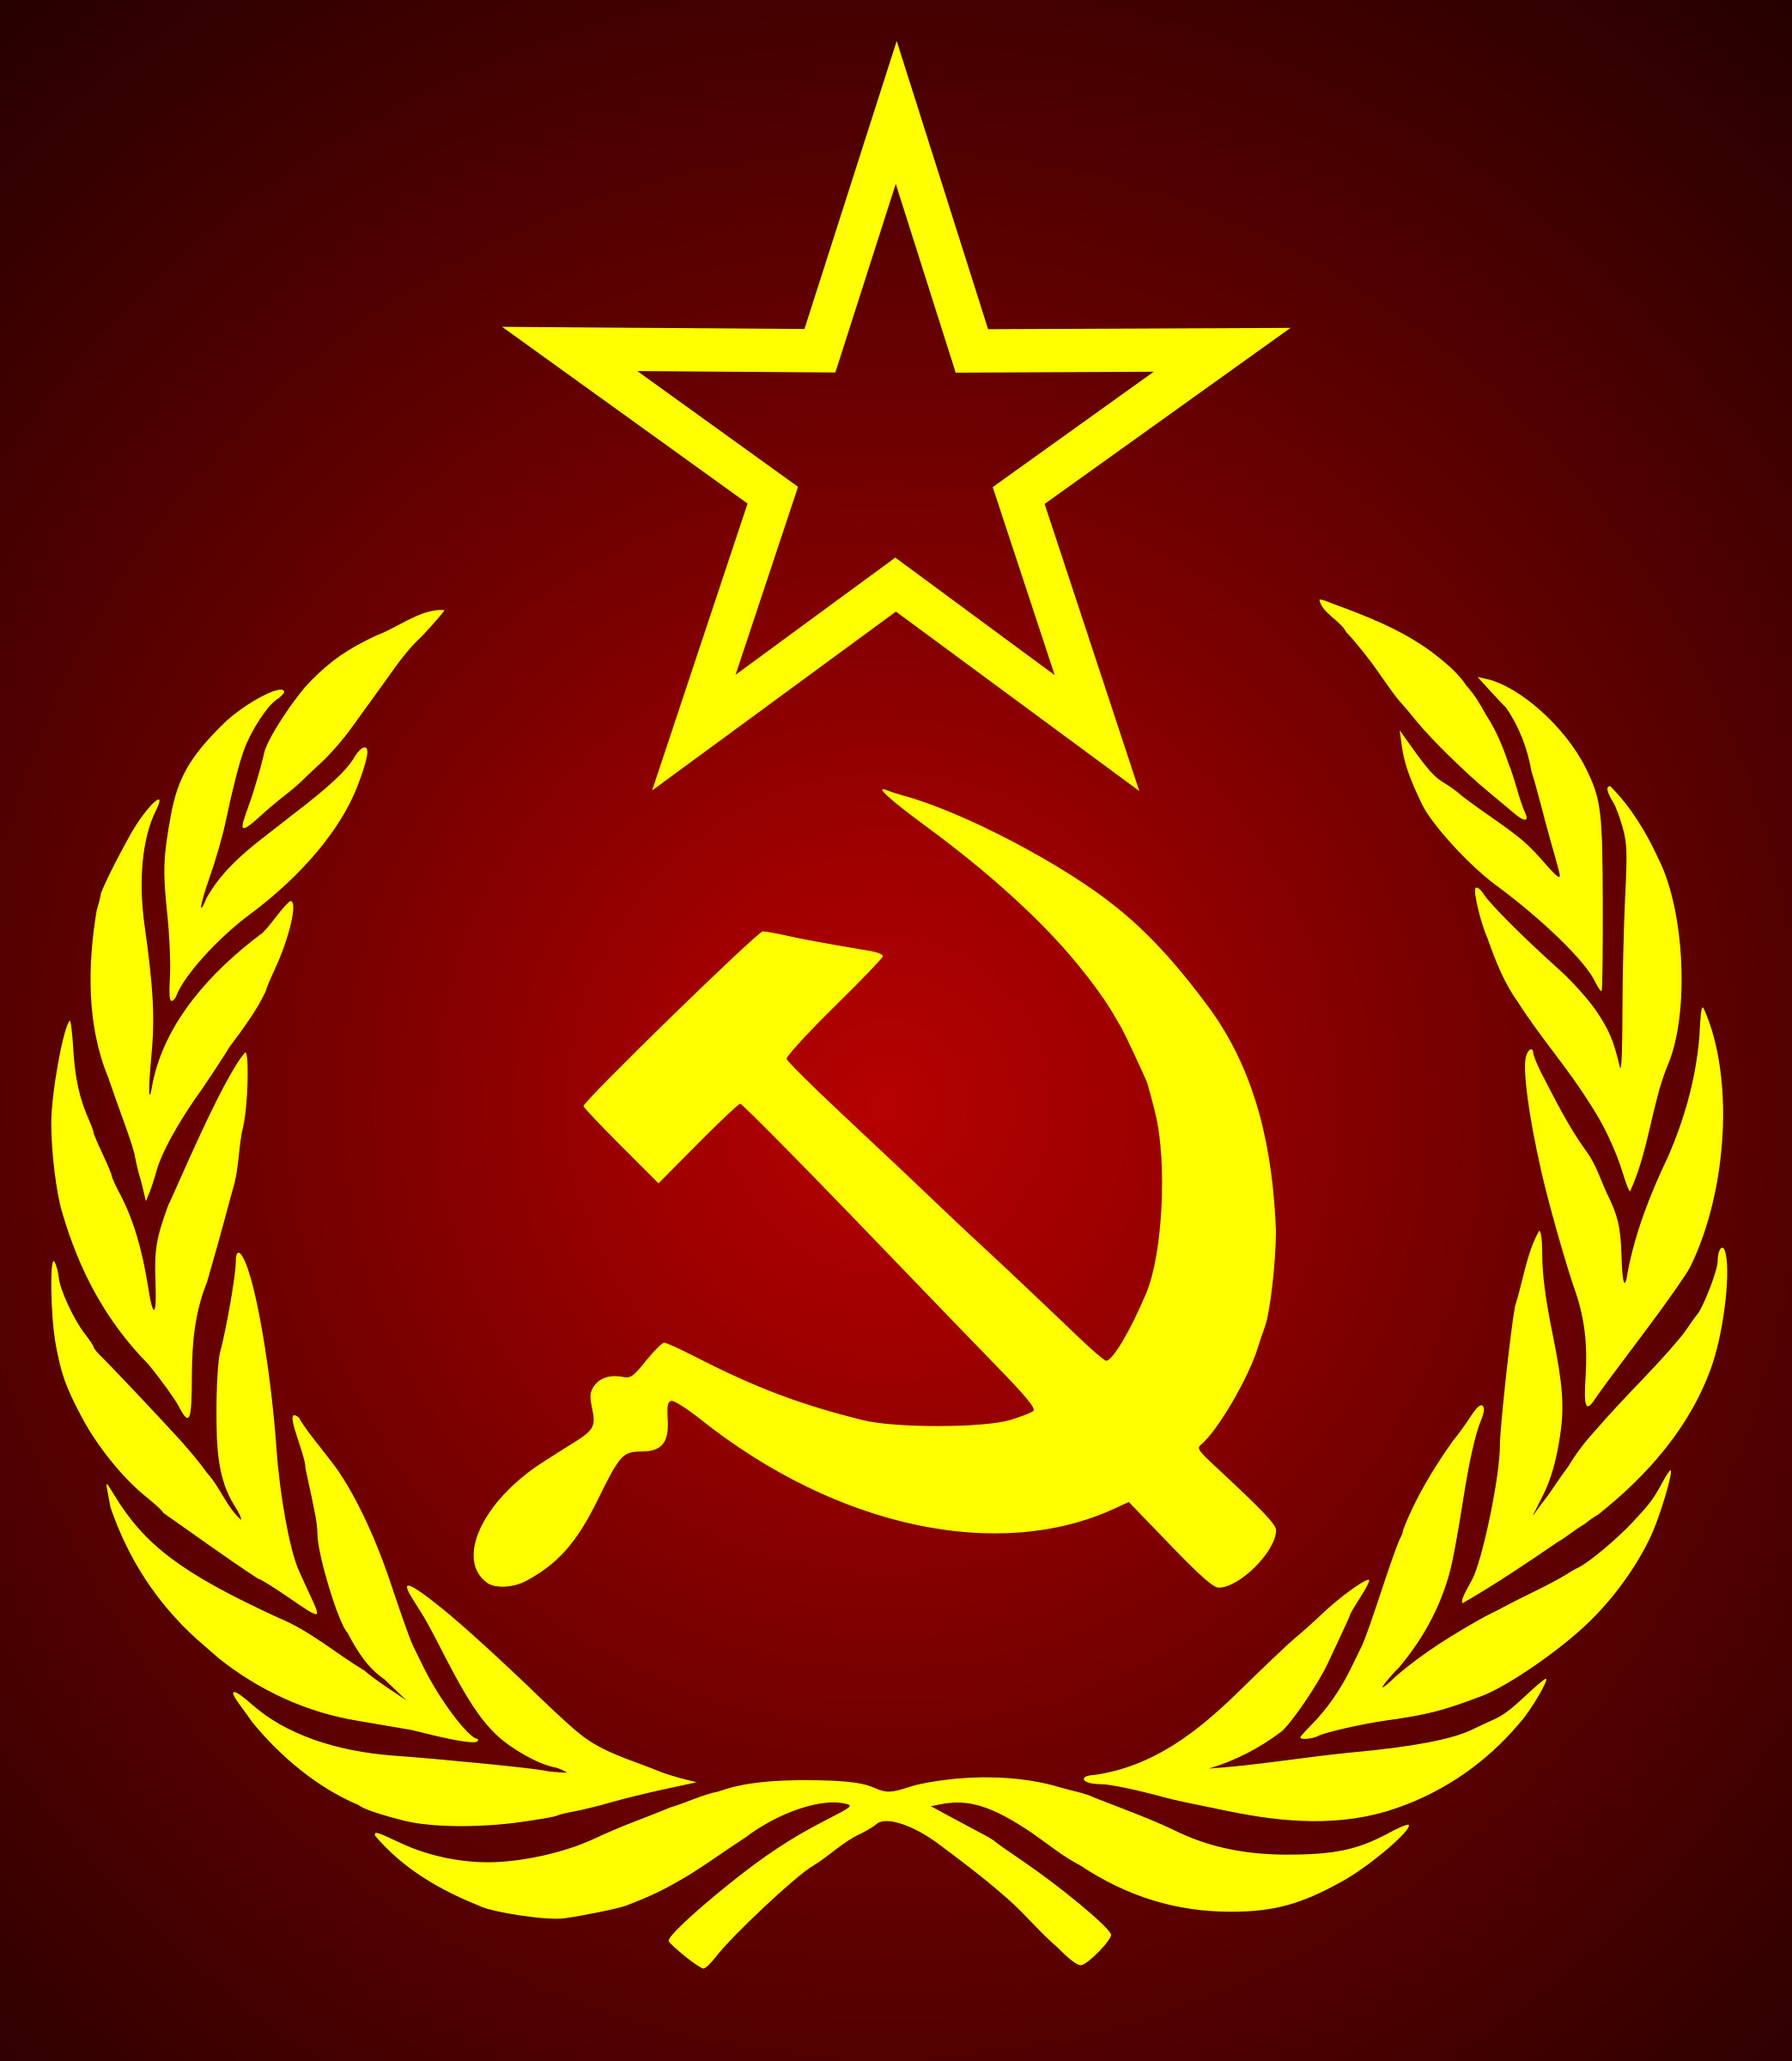 Hammer and Sickle Star